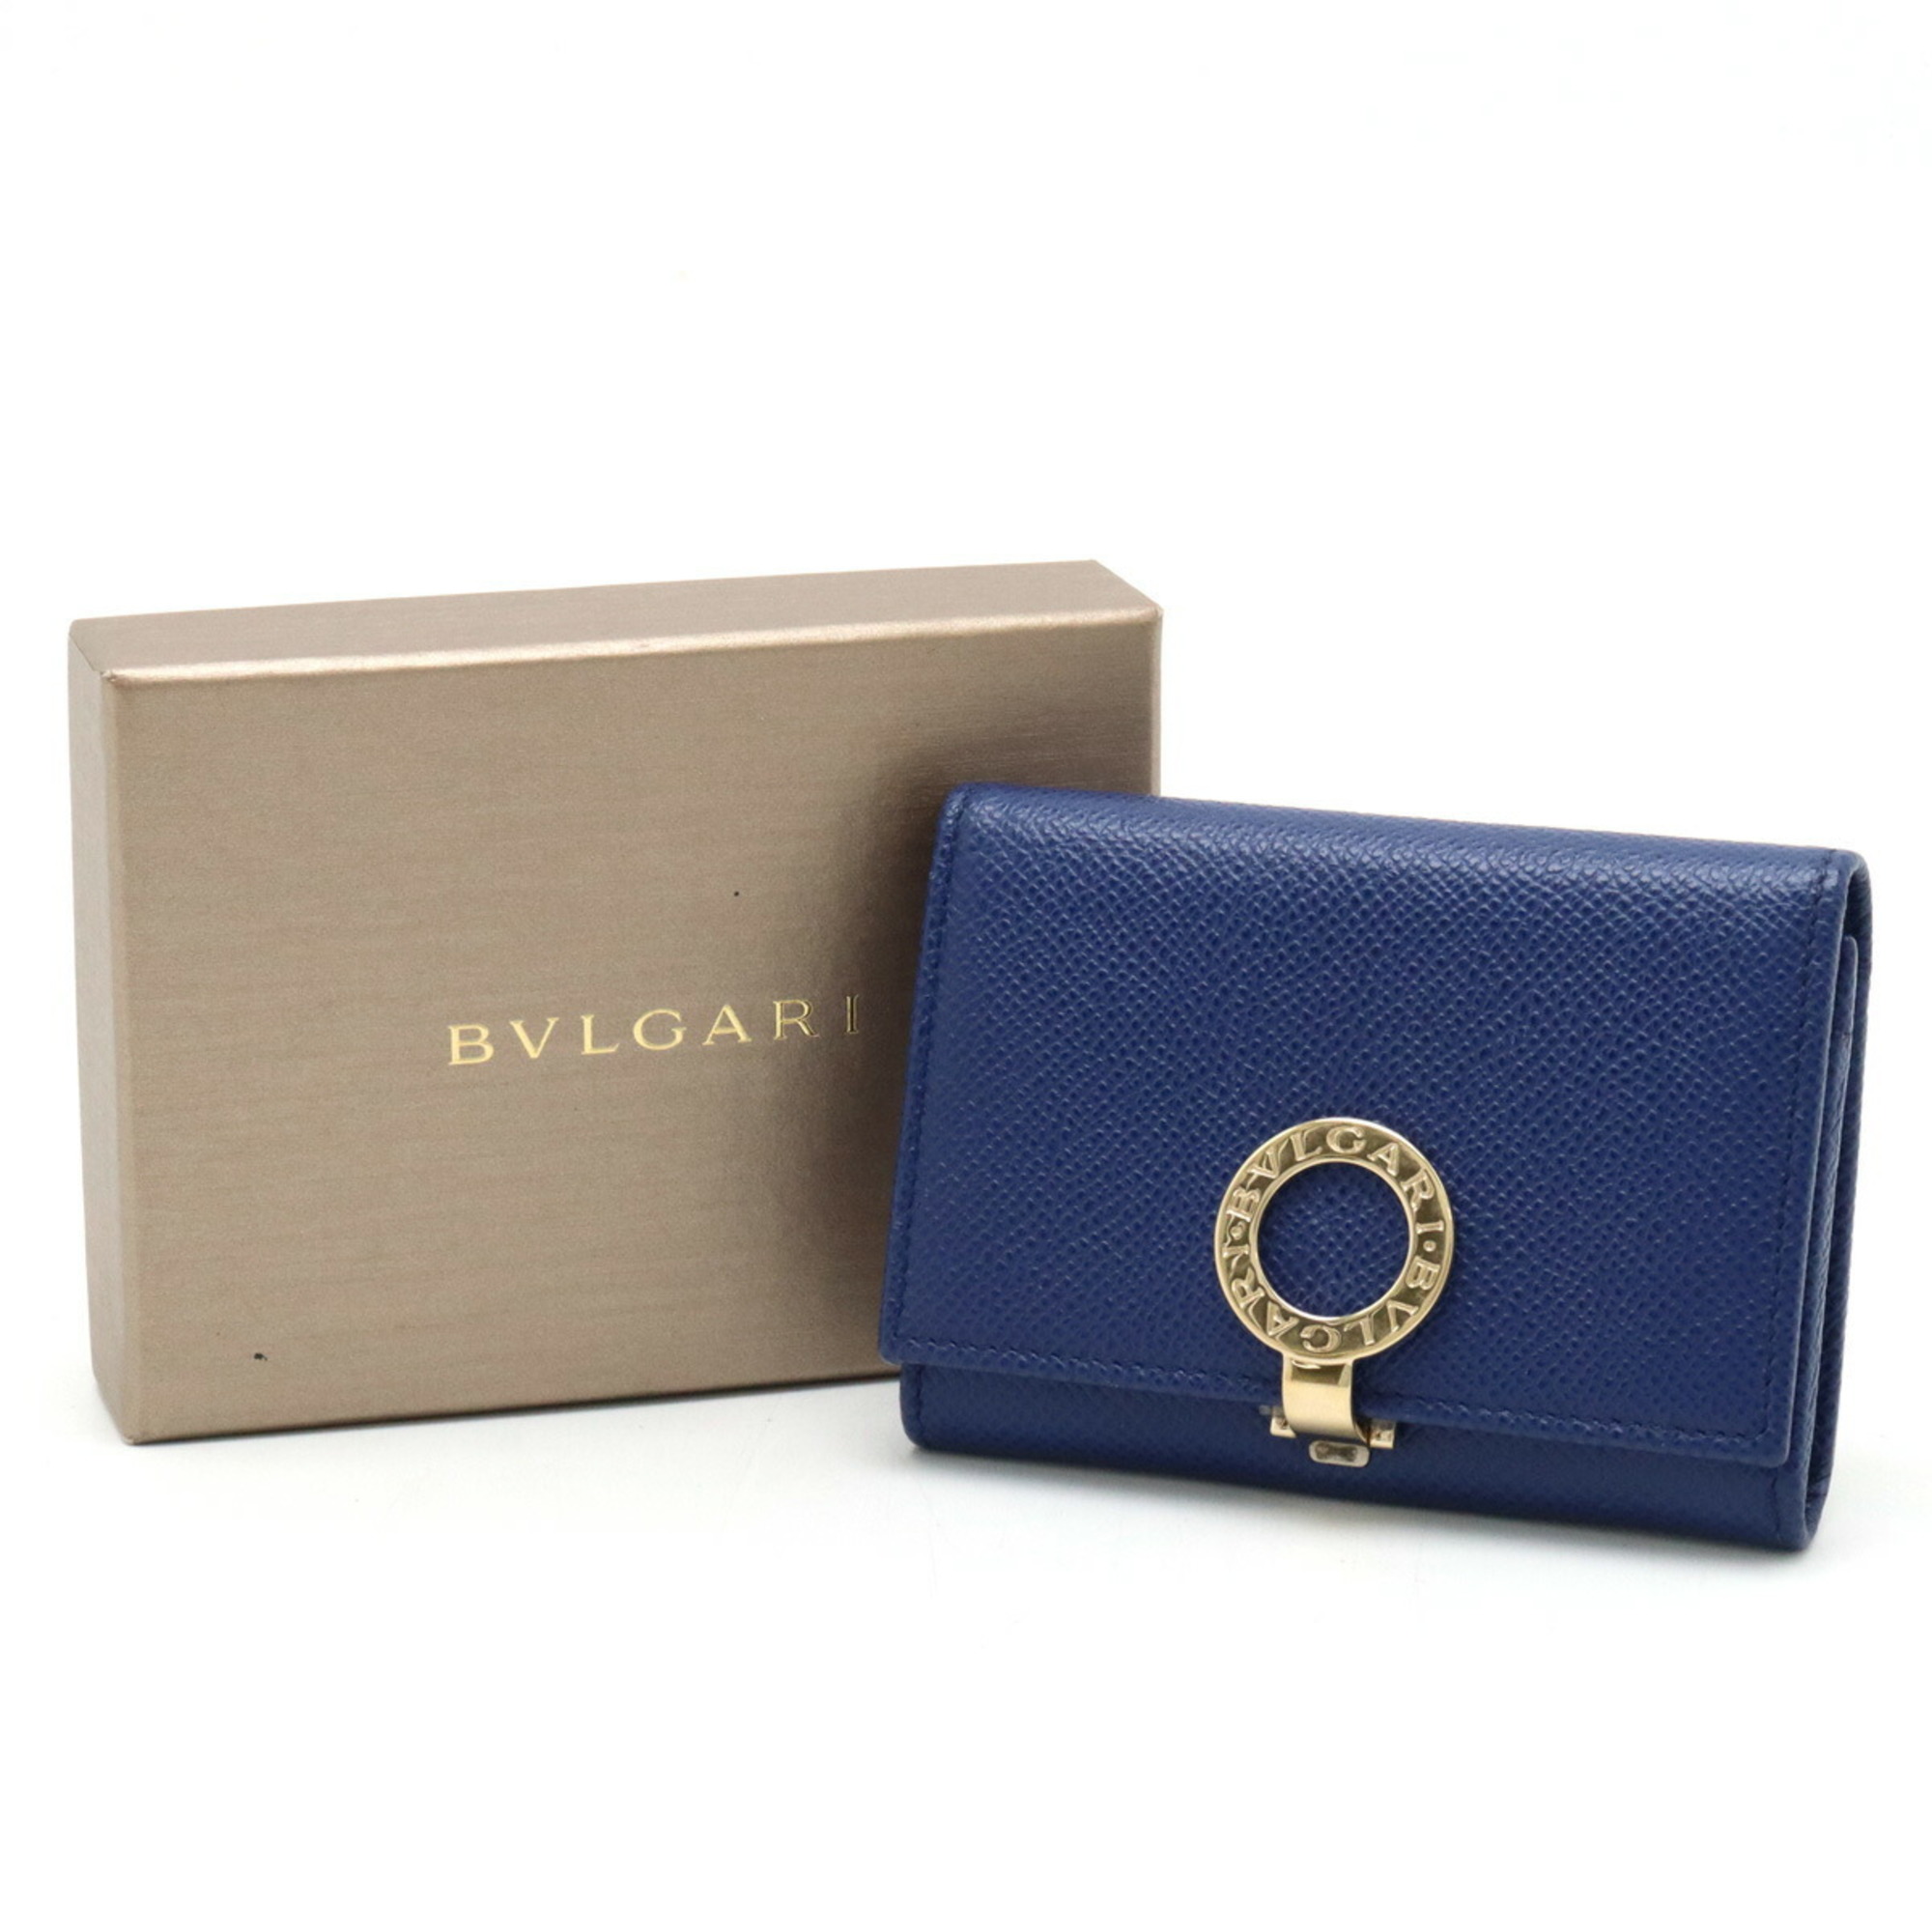 BVLGARI Clip Card Case Business Holder Pass ID Grain Leather Blue 30420